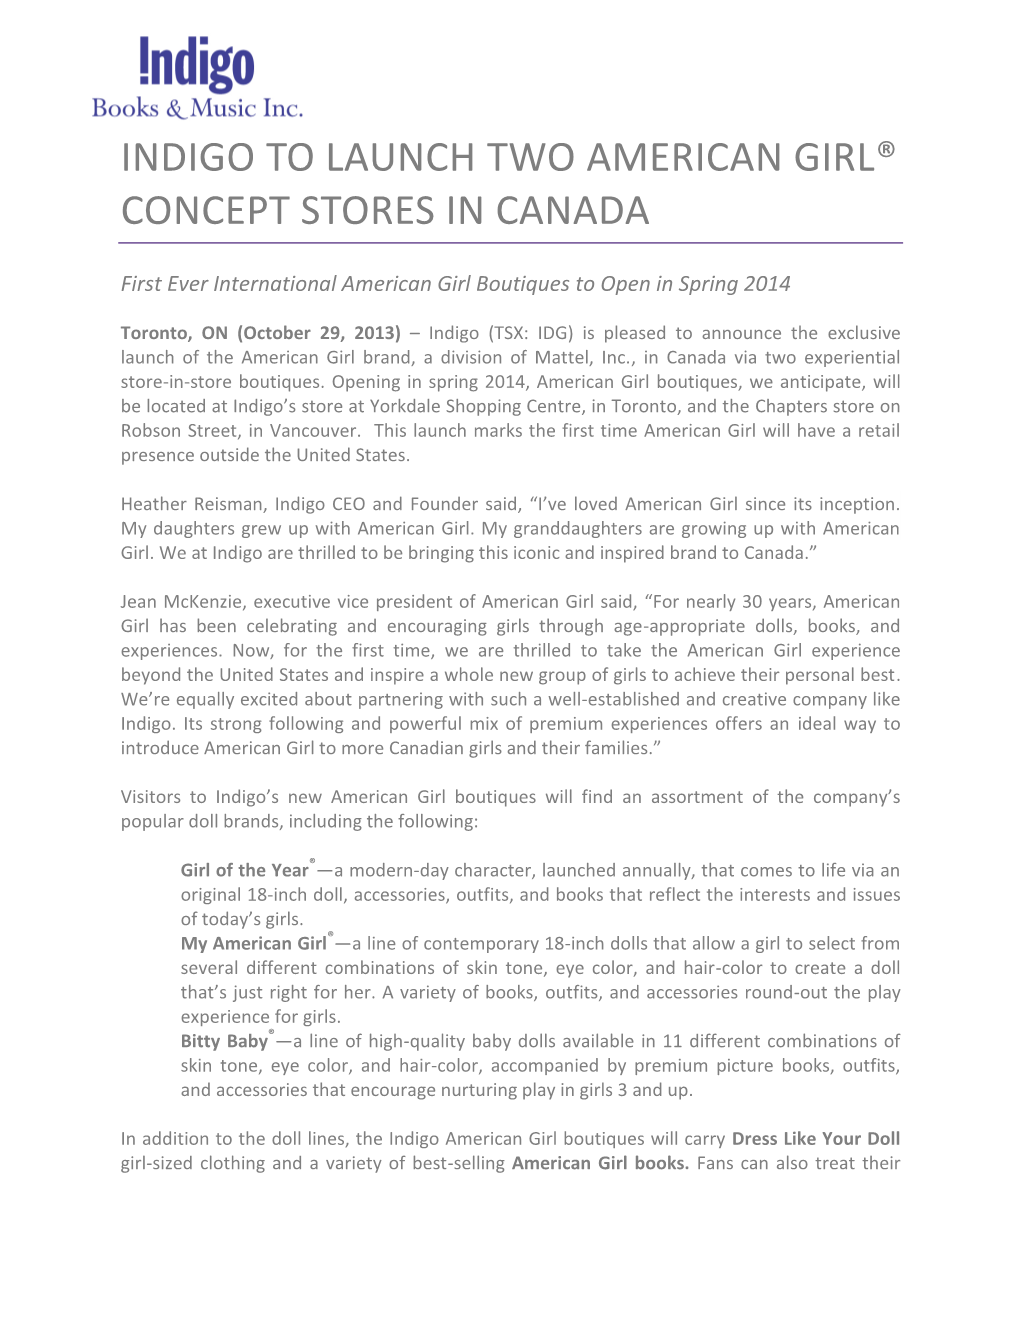 Indigo to Launch Two American Girl® Concept Stores in Canada